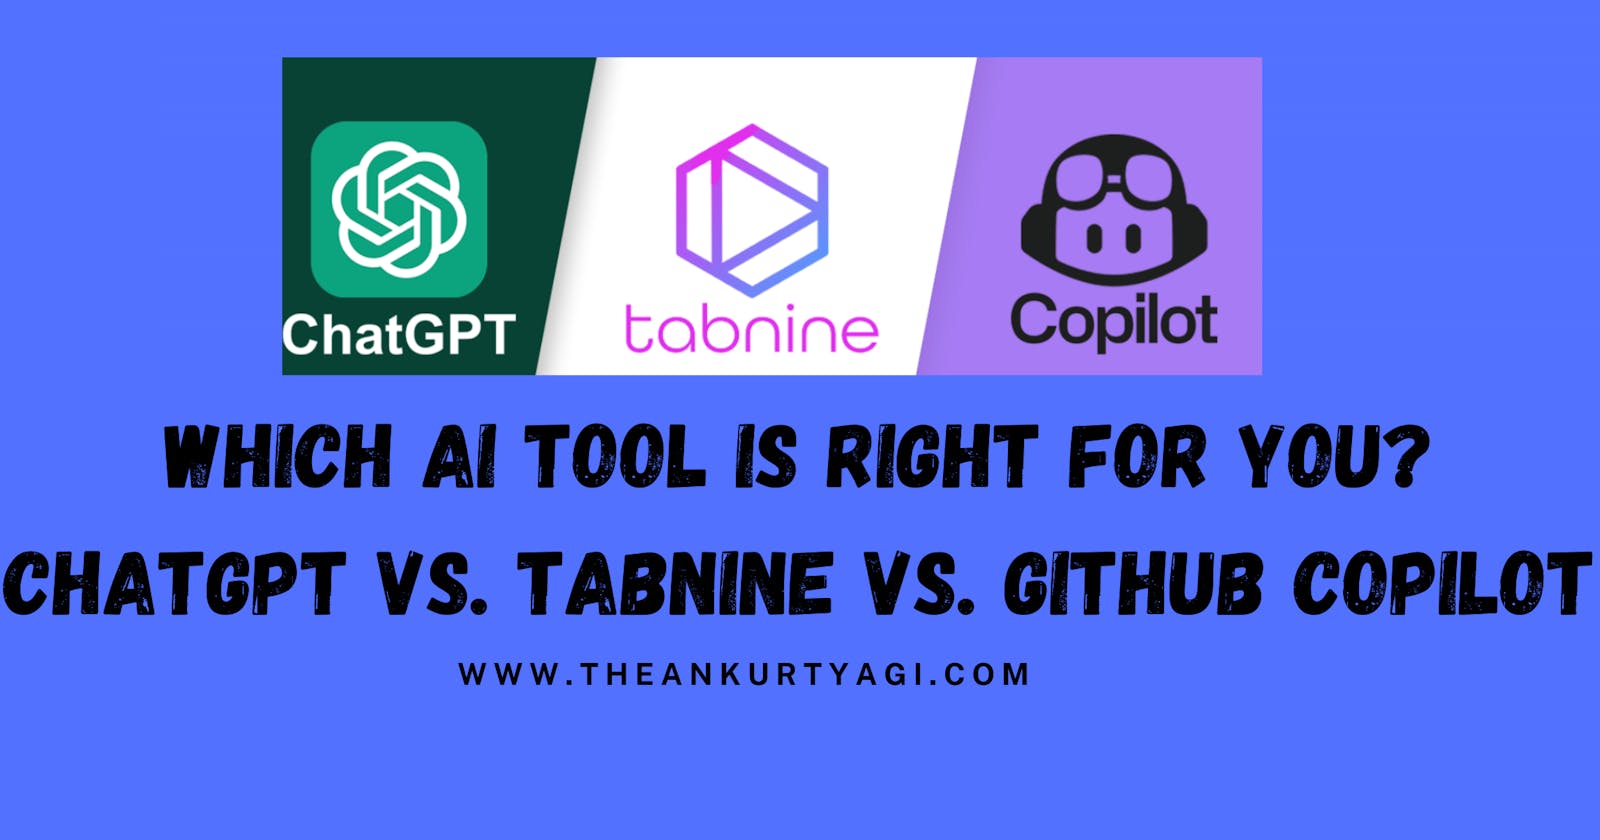 Which AI Tool Is Right For You? ChatGPT vs. Tabnine vs. GitHub Copilot